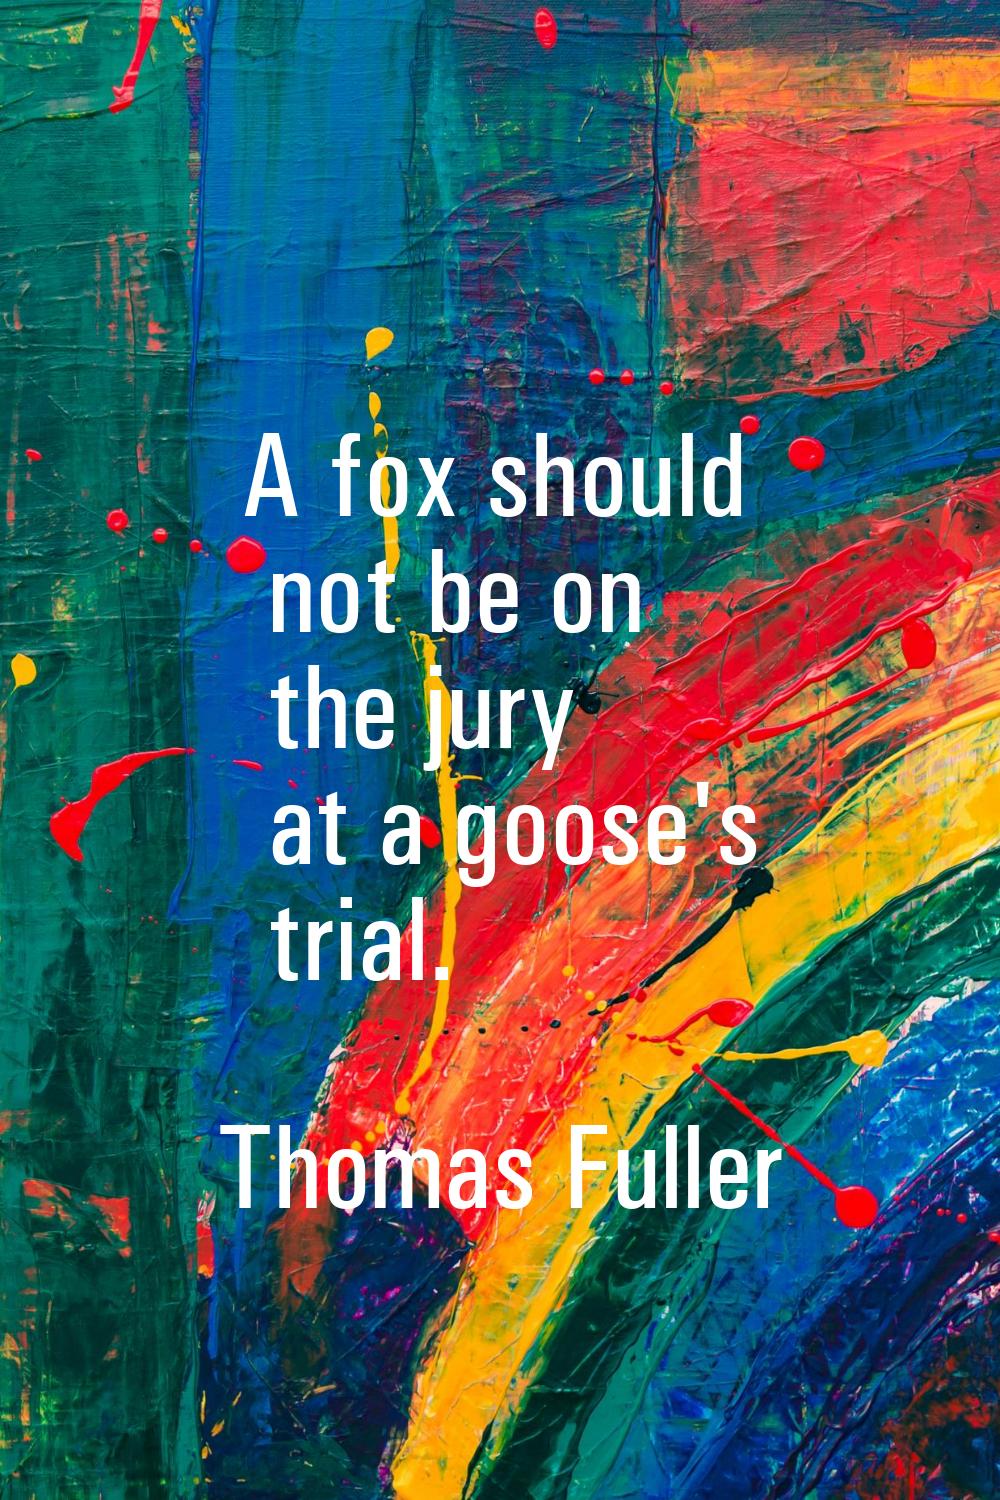 A fox should not be on the jury at a goose's trial.